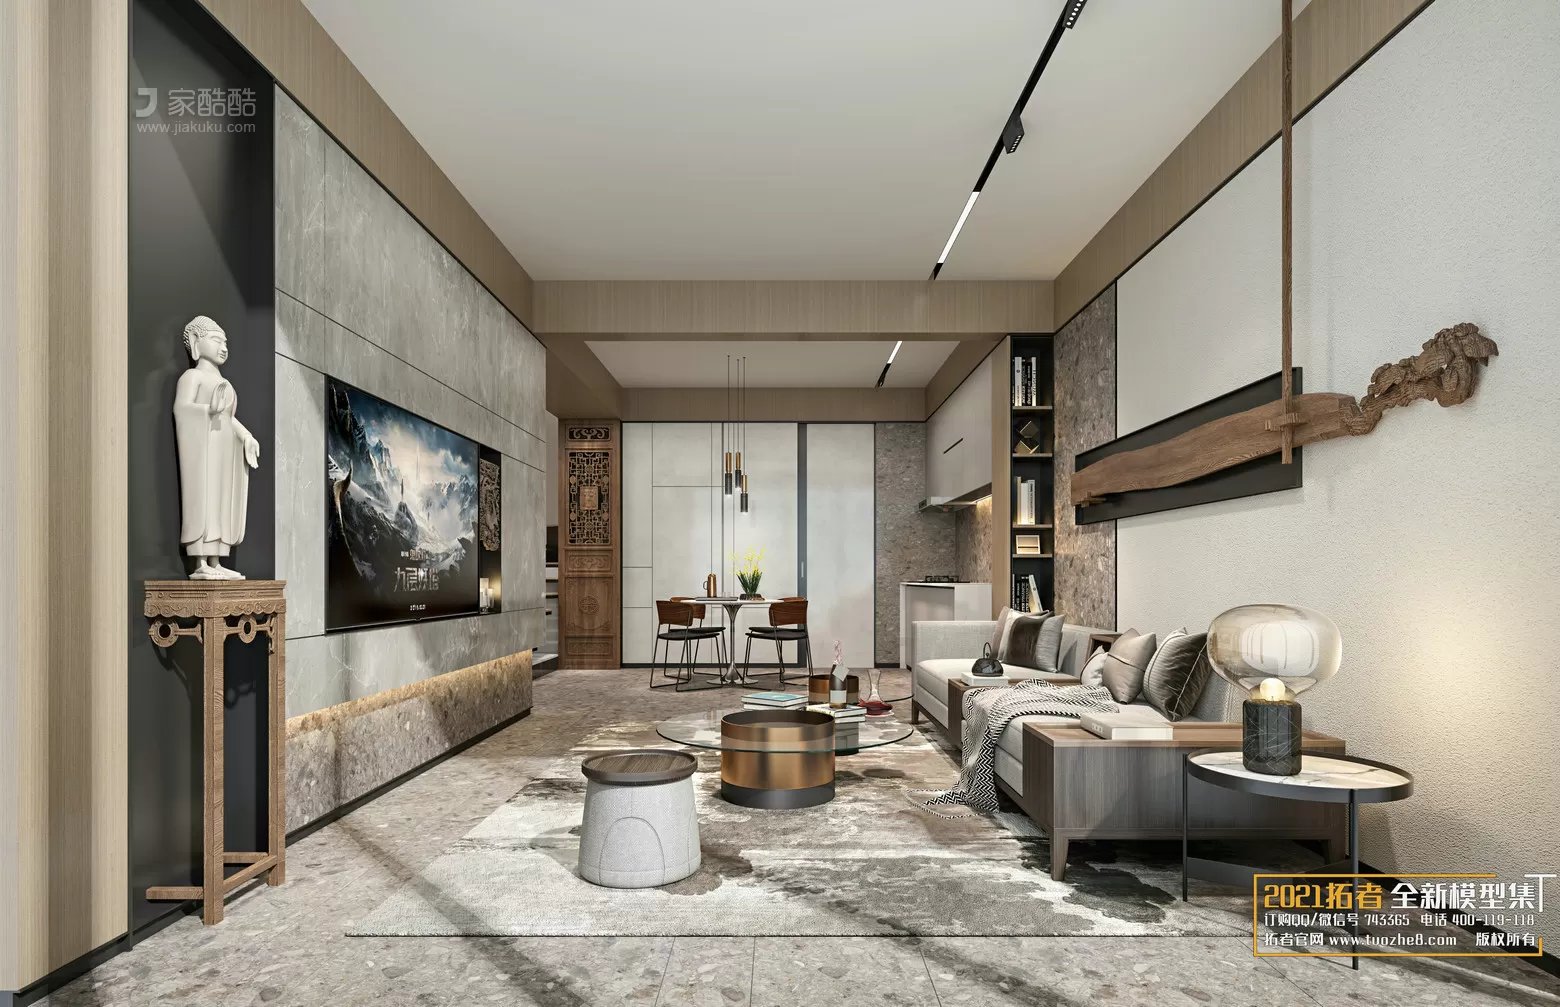 EXTENSION 2021 – 1. LIVING ROOM – 1.2. CHINESE STYLES – 28vr – VRAY